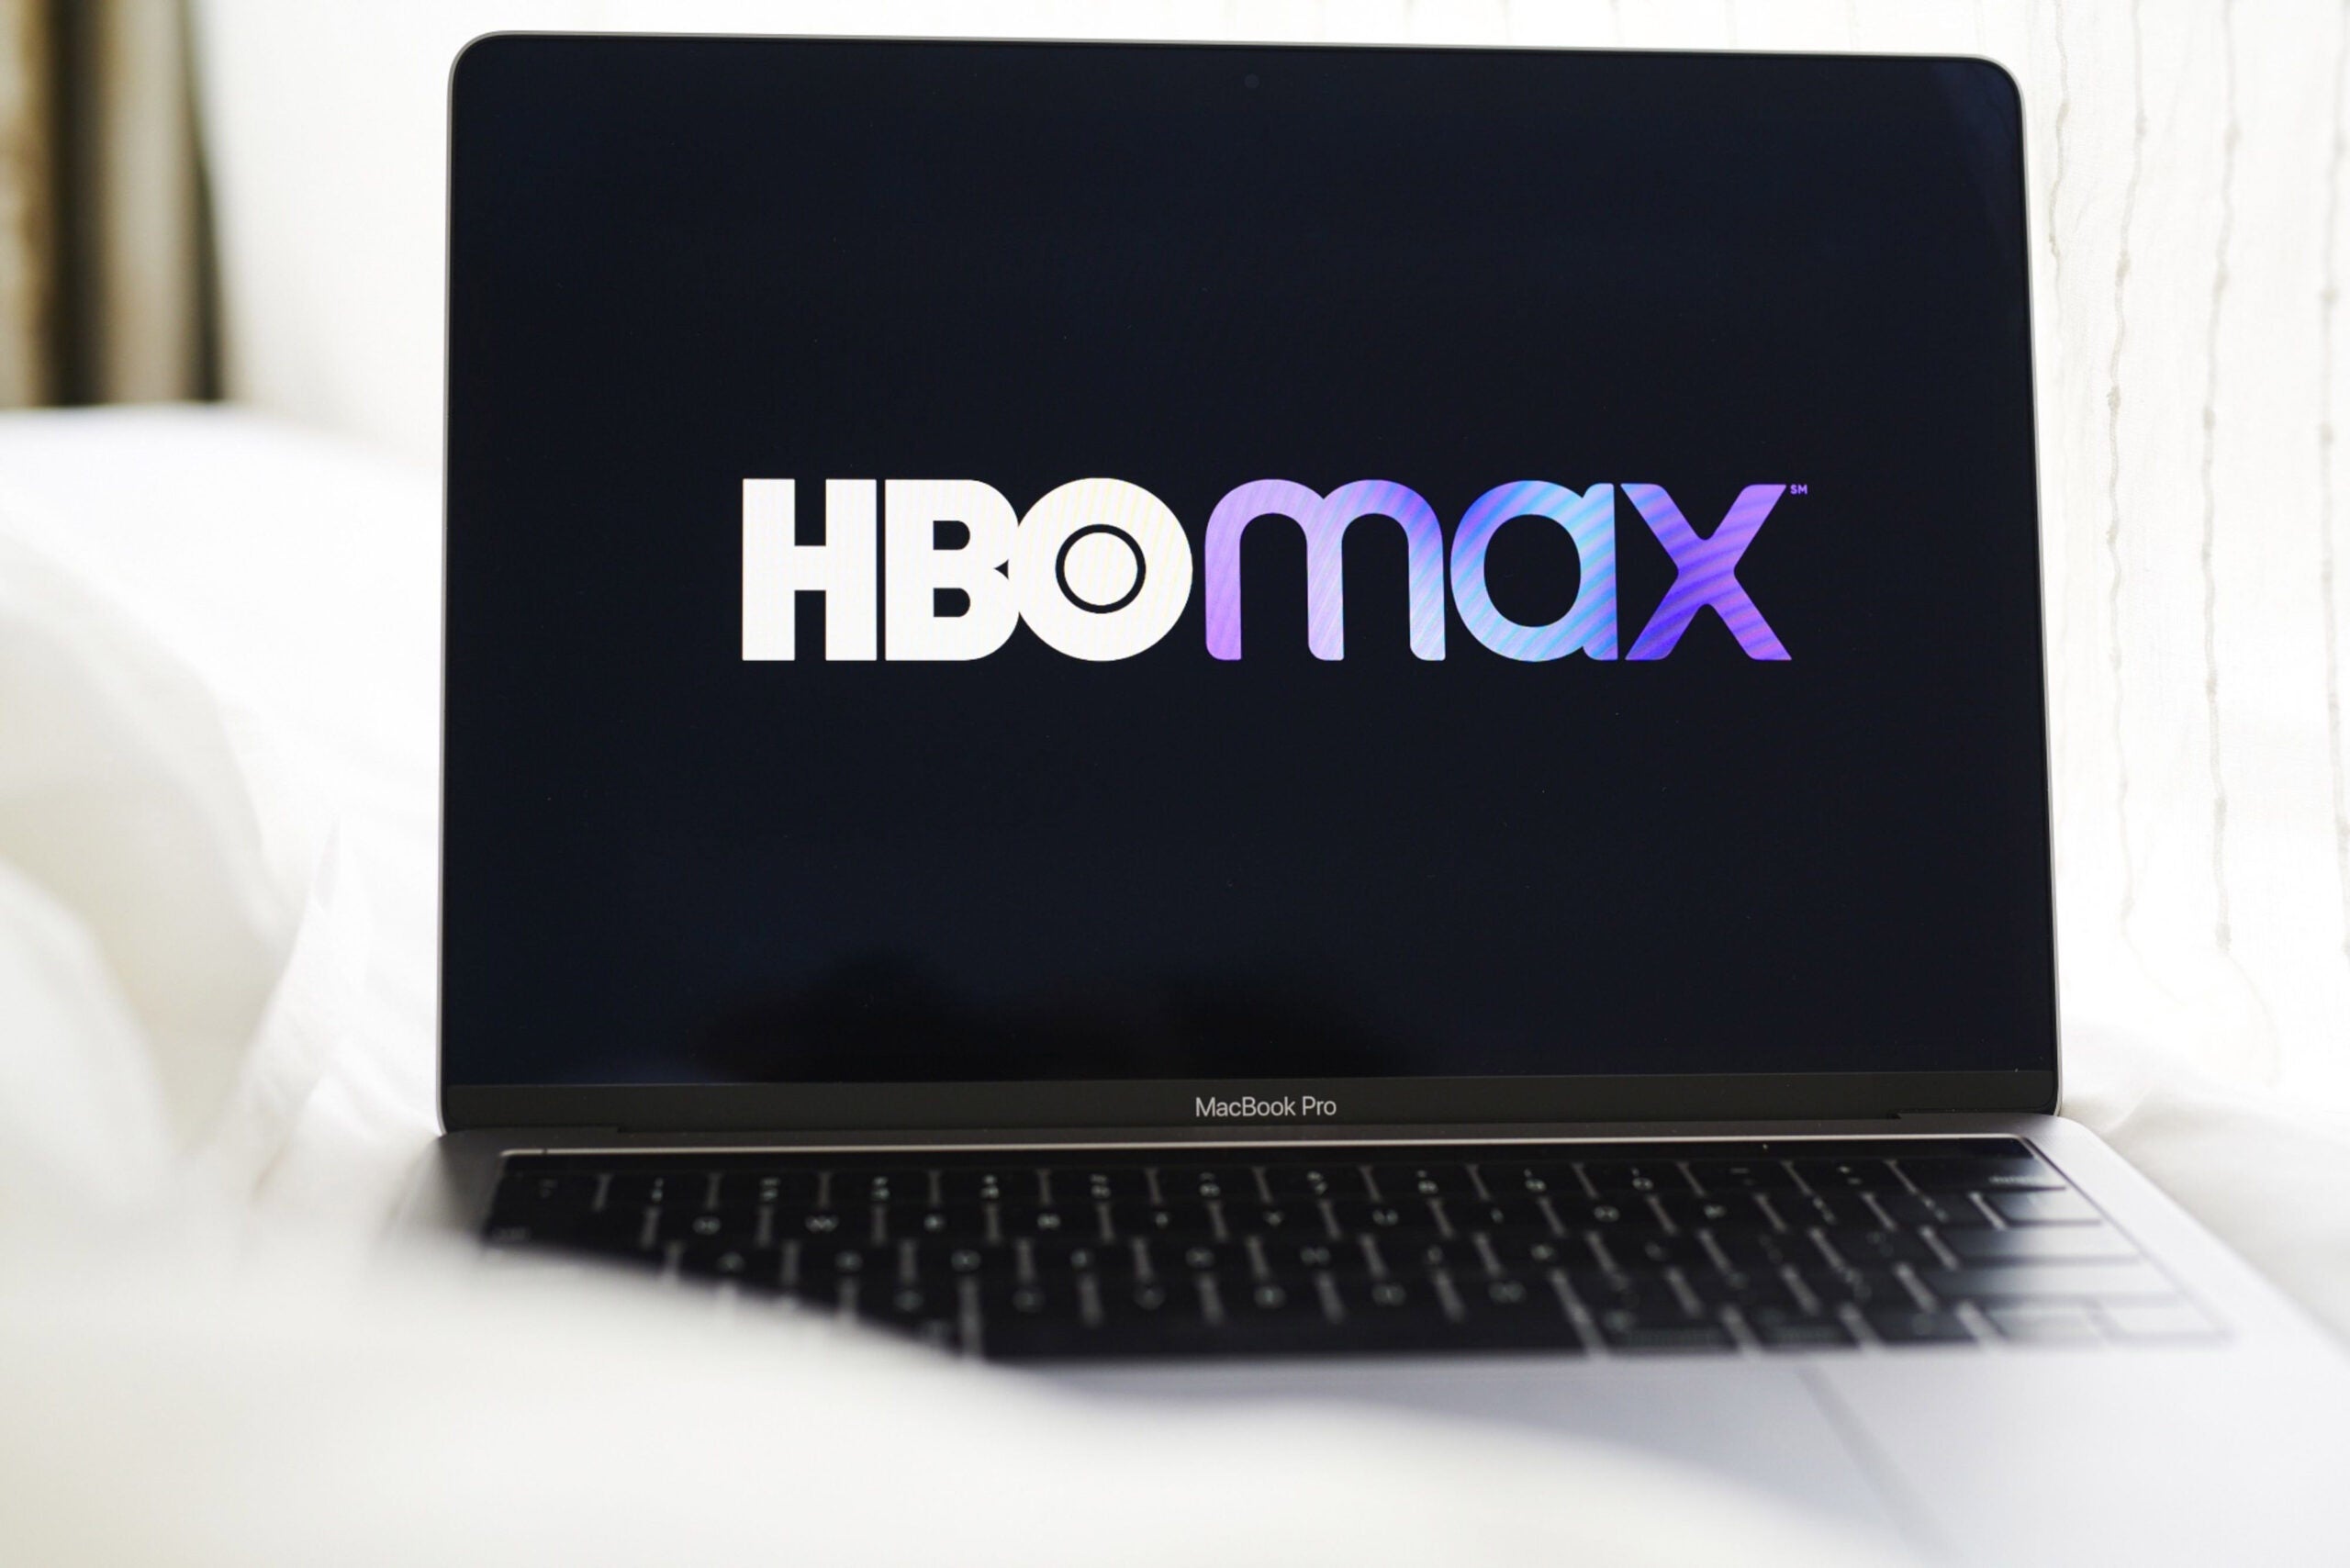 The logo for HBO Max on a laptop computer.